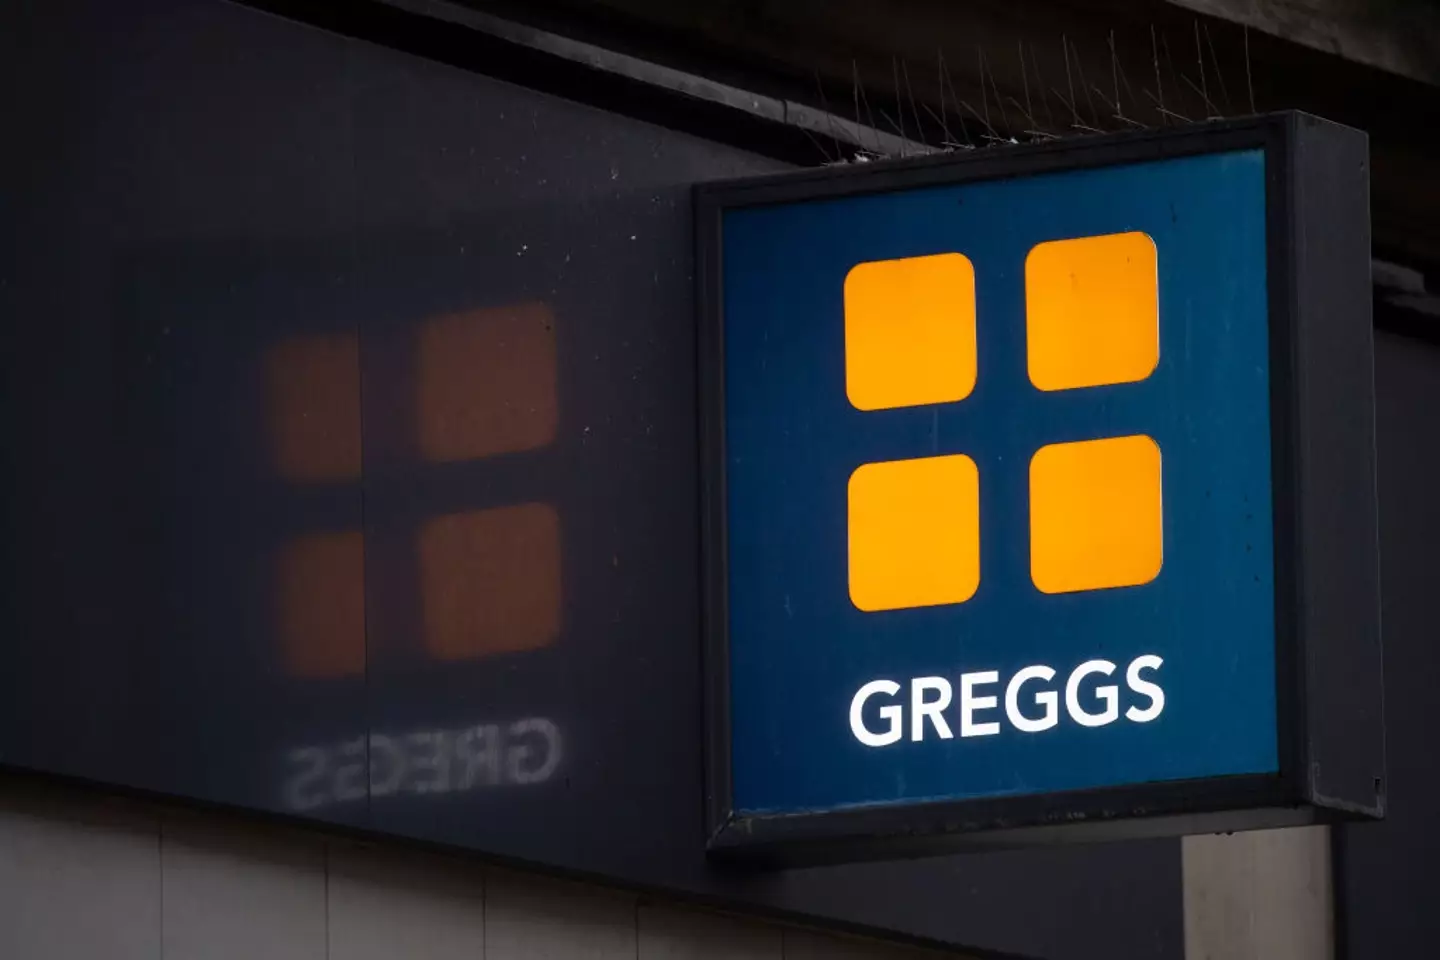 Now you know more about Greggs.